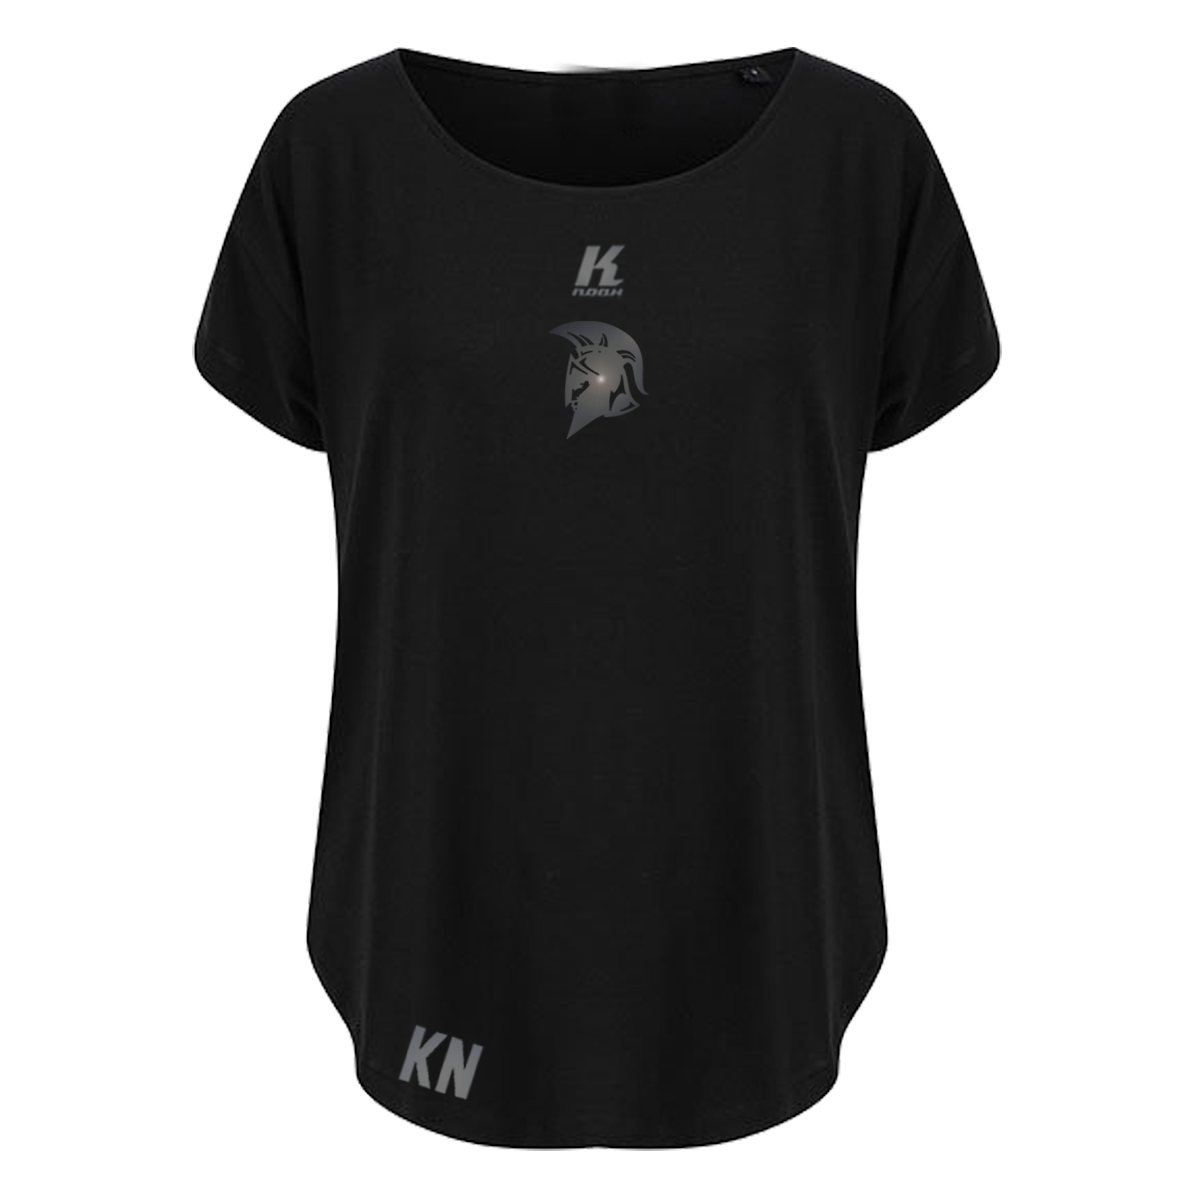 Spartans "Blackline" Womens Sports Tee TL527 with Initials/Playernumber